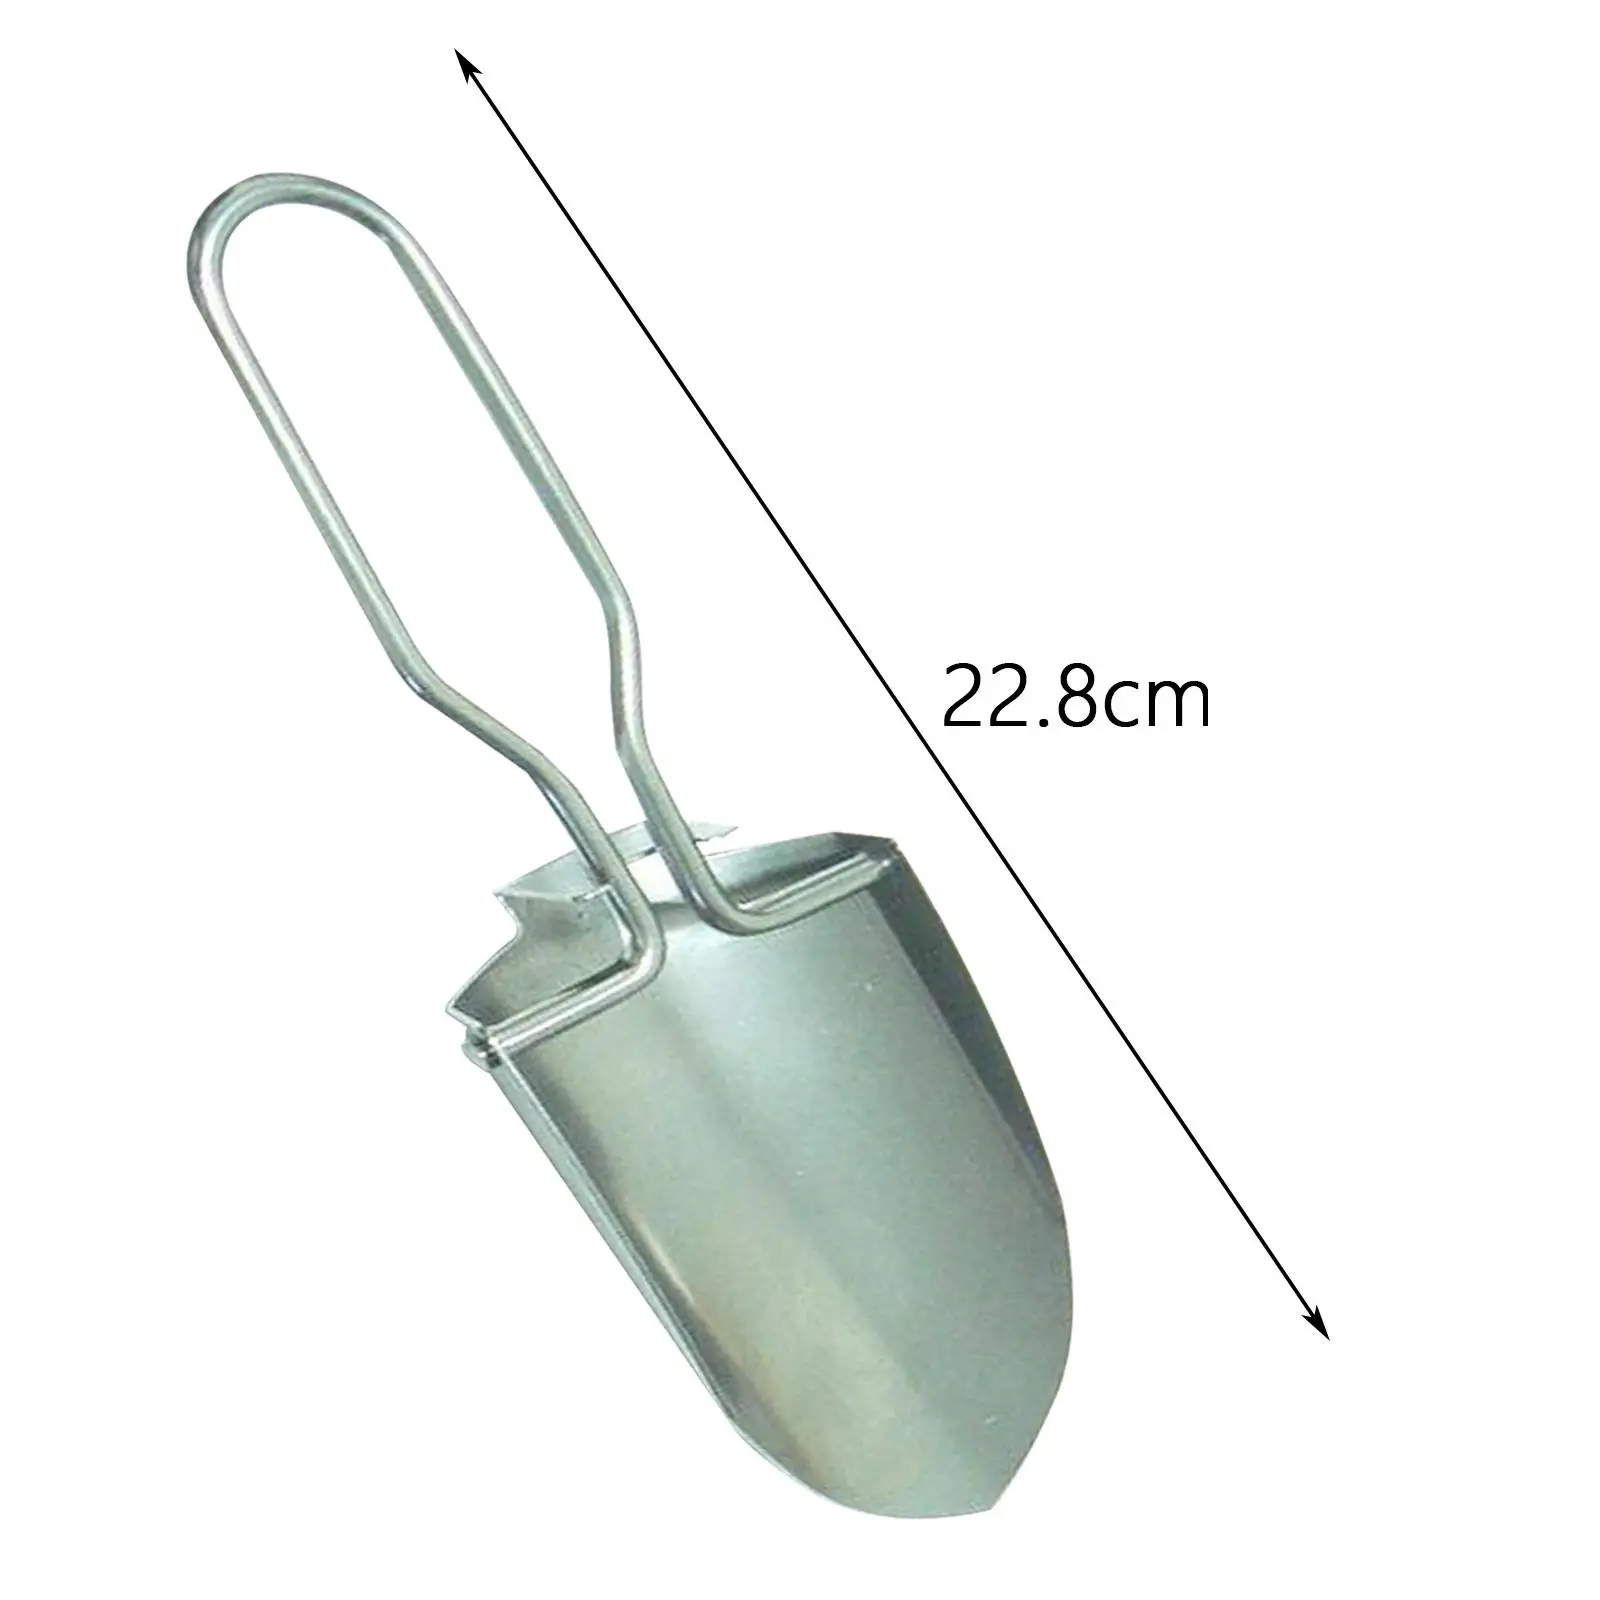 Stainless Steel Foldable Garden Shovel with Storage Bag Mini Folding Trowel Garden Tools for Planting Courtyard Farm Lawn Hiking